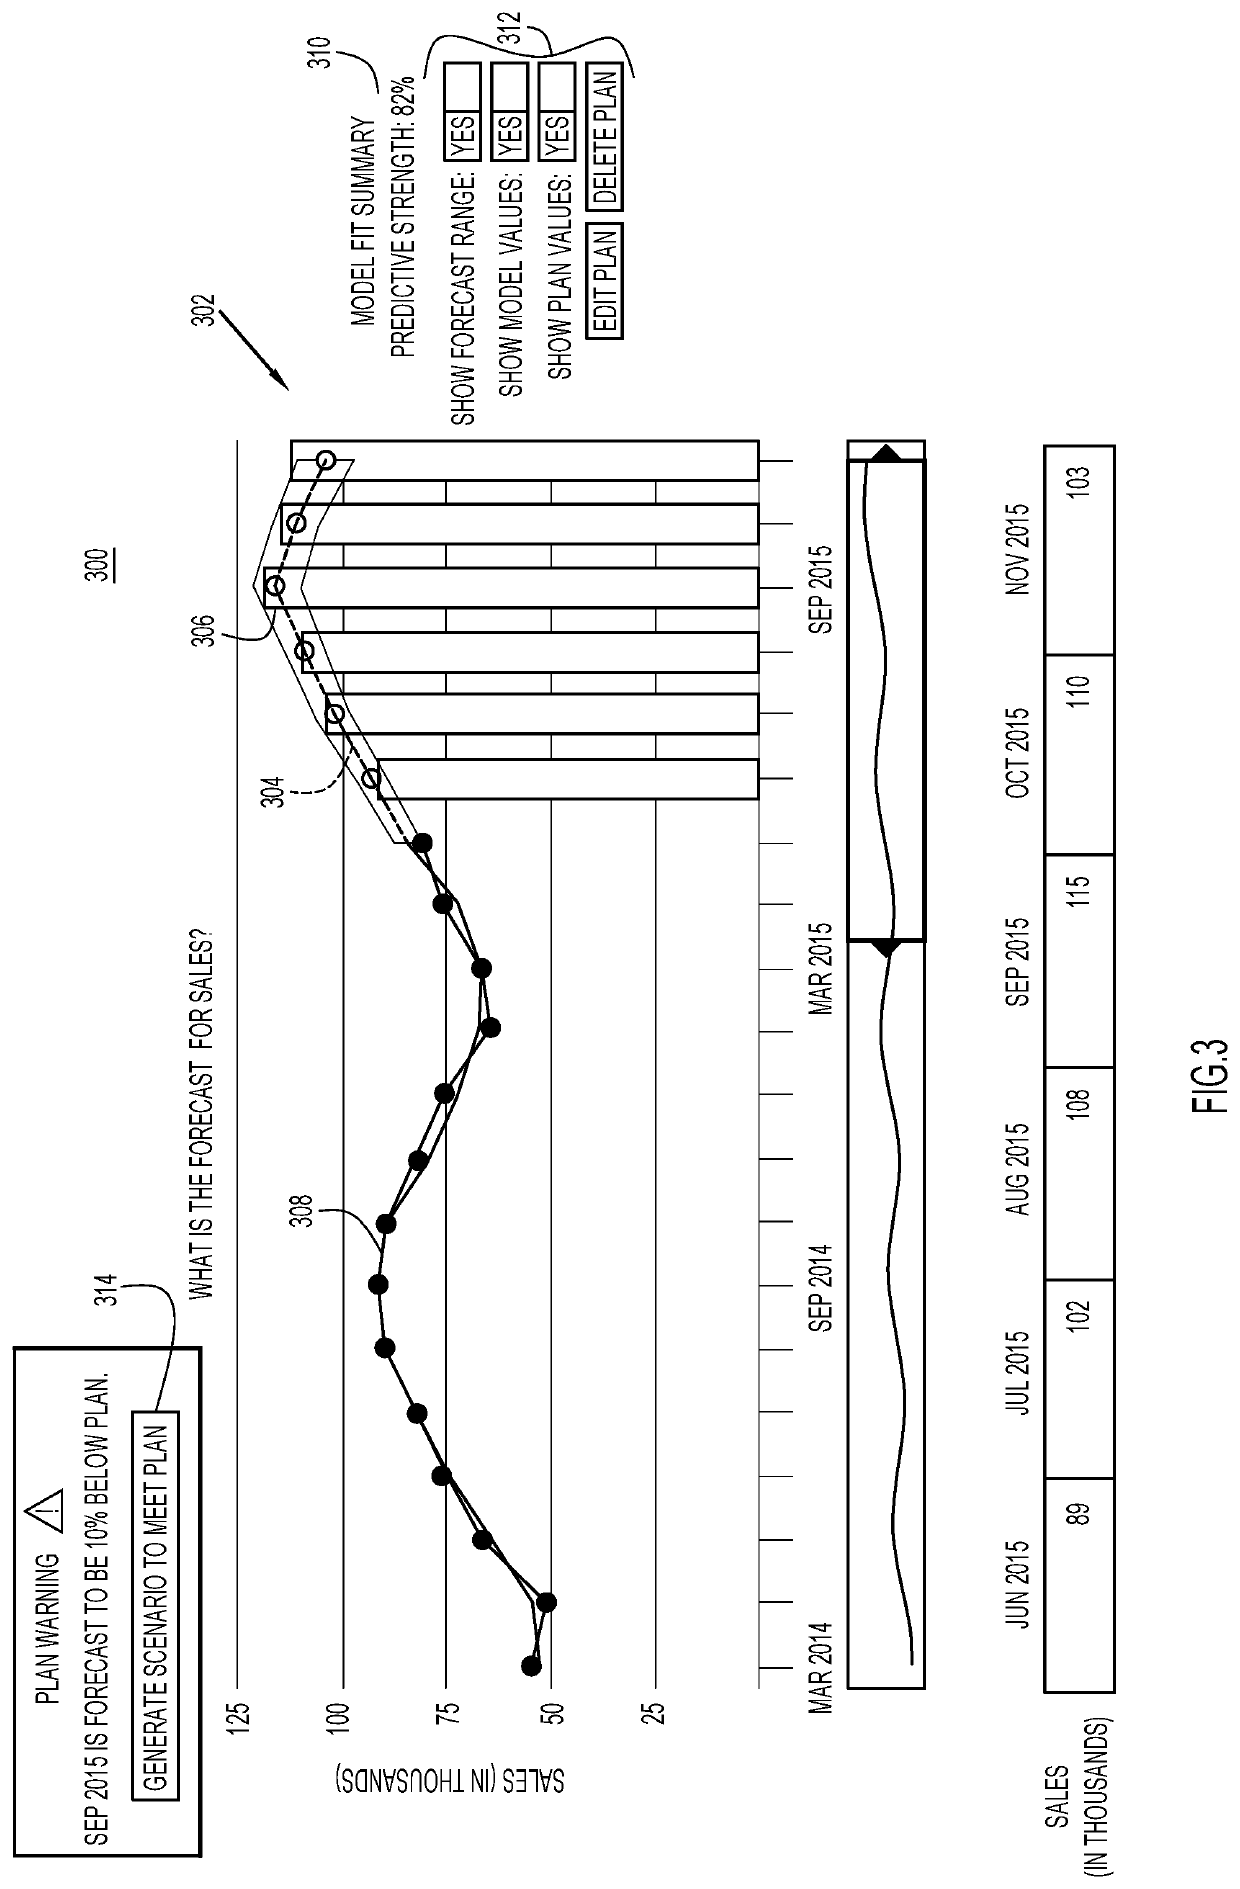 System and method for combining what-if and goal seeking analyses for prescriptive time series forecasting